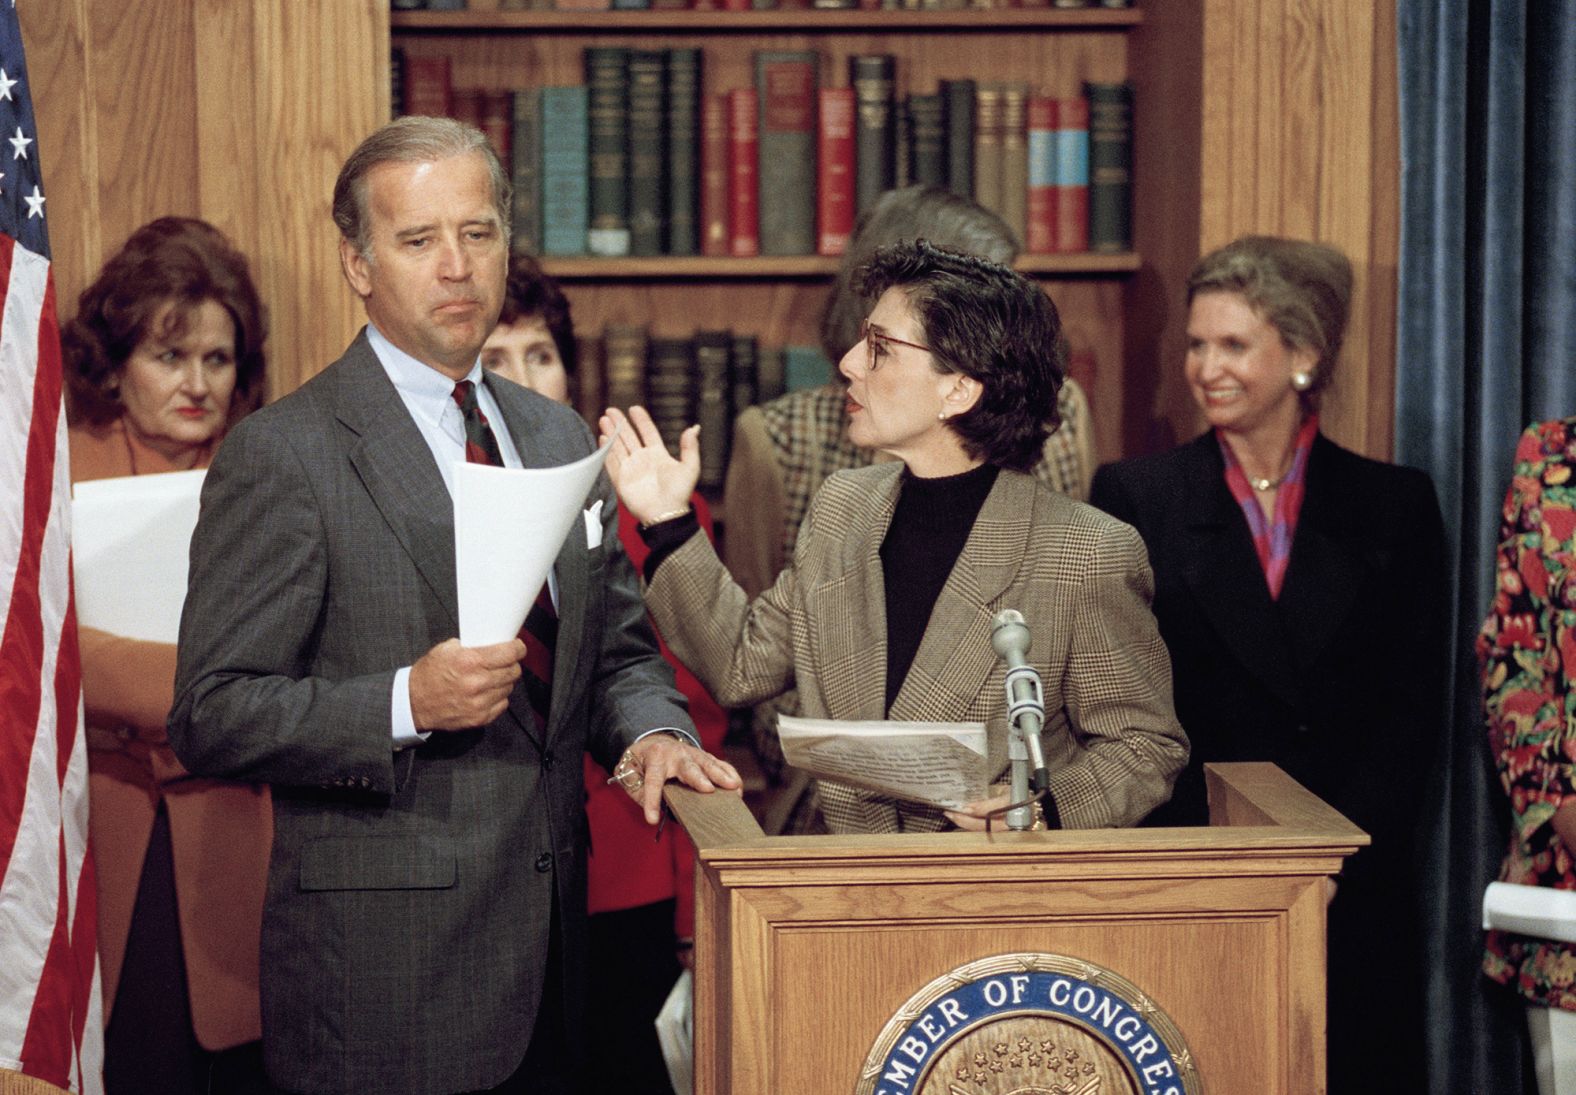 US Sen. Barbara Boxer gestures toward US Sen. Joe Biden during a news conference about the Violence Against Women Act in 1993. The landmark legislation, passed one year later, was one of the first federal packages of its kind to protect victims of domestic violence and sexual assault.